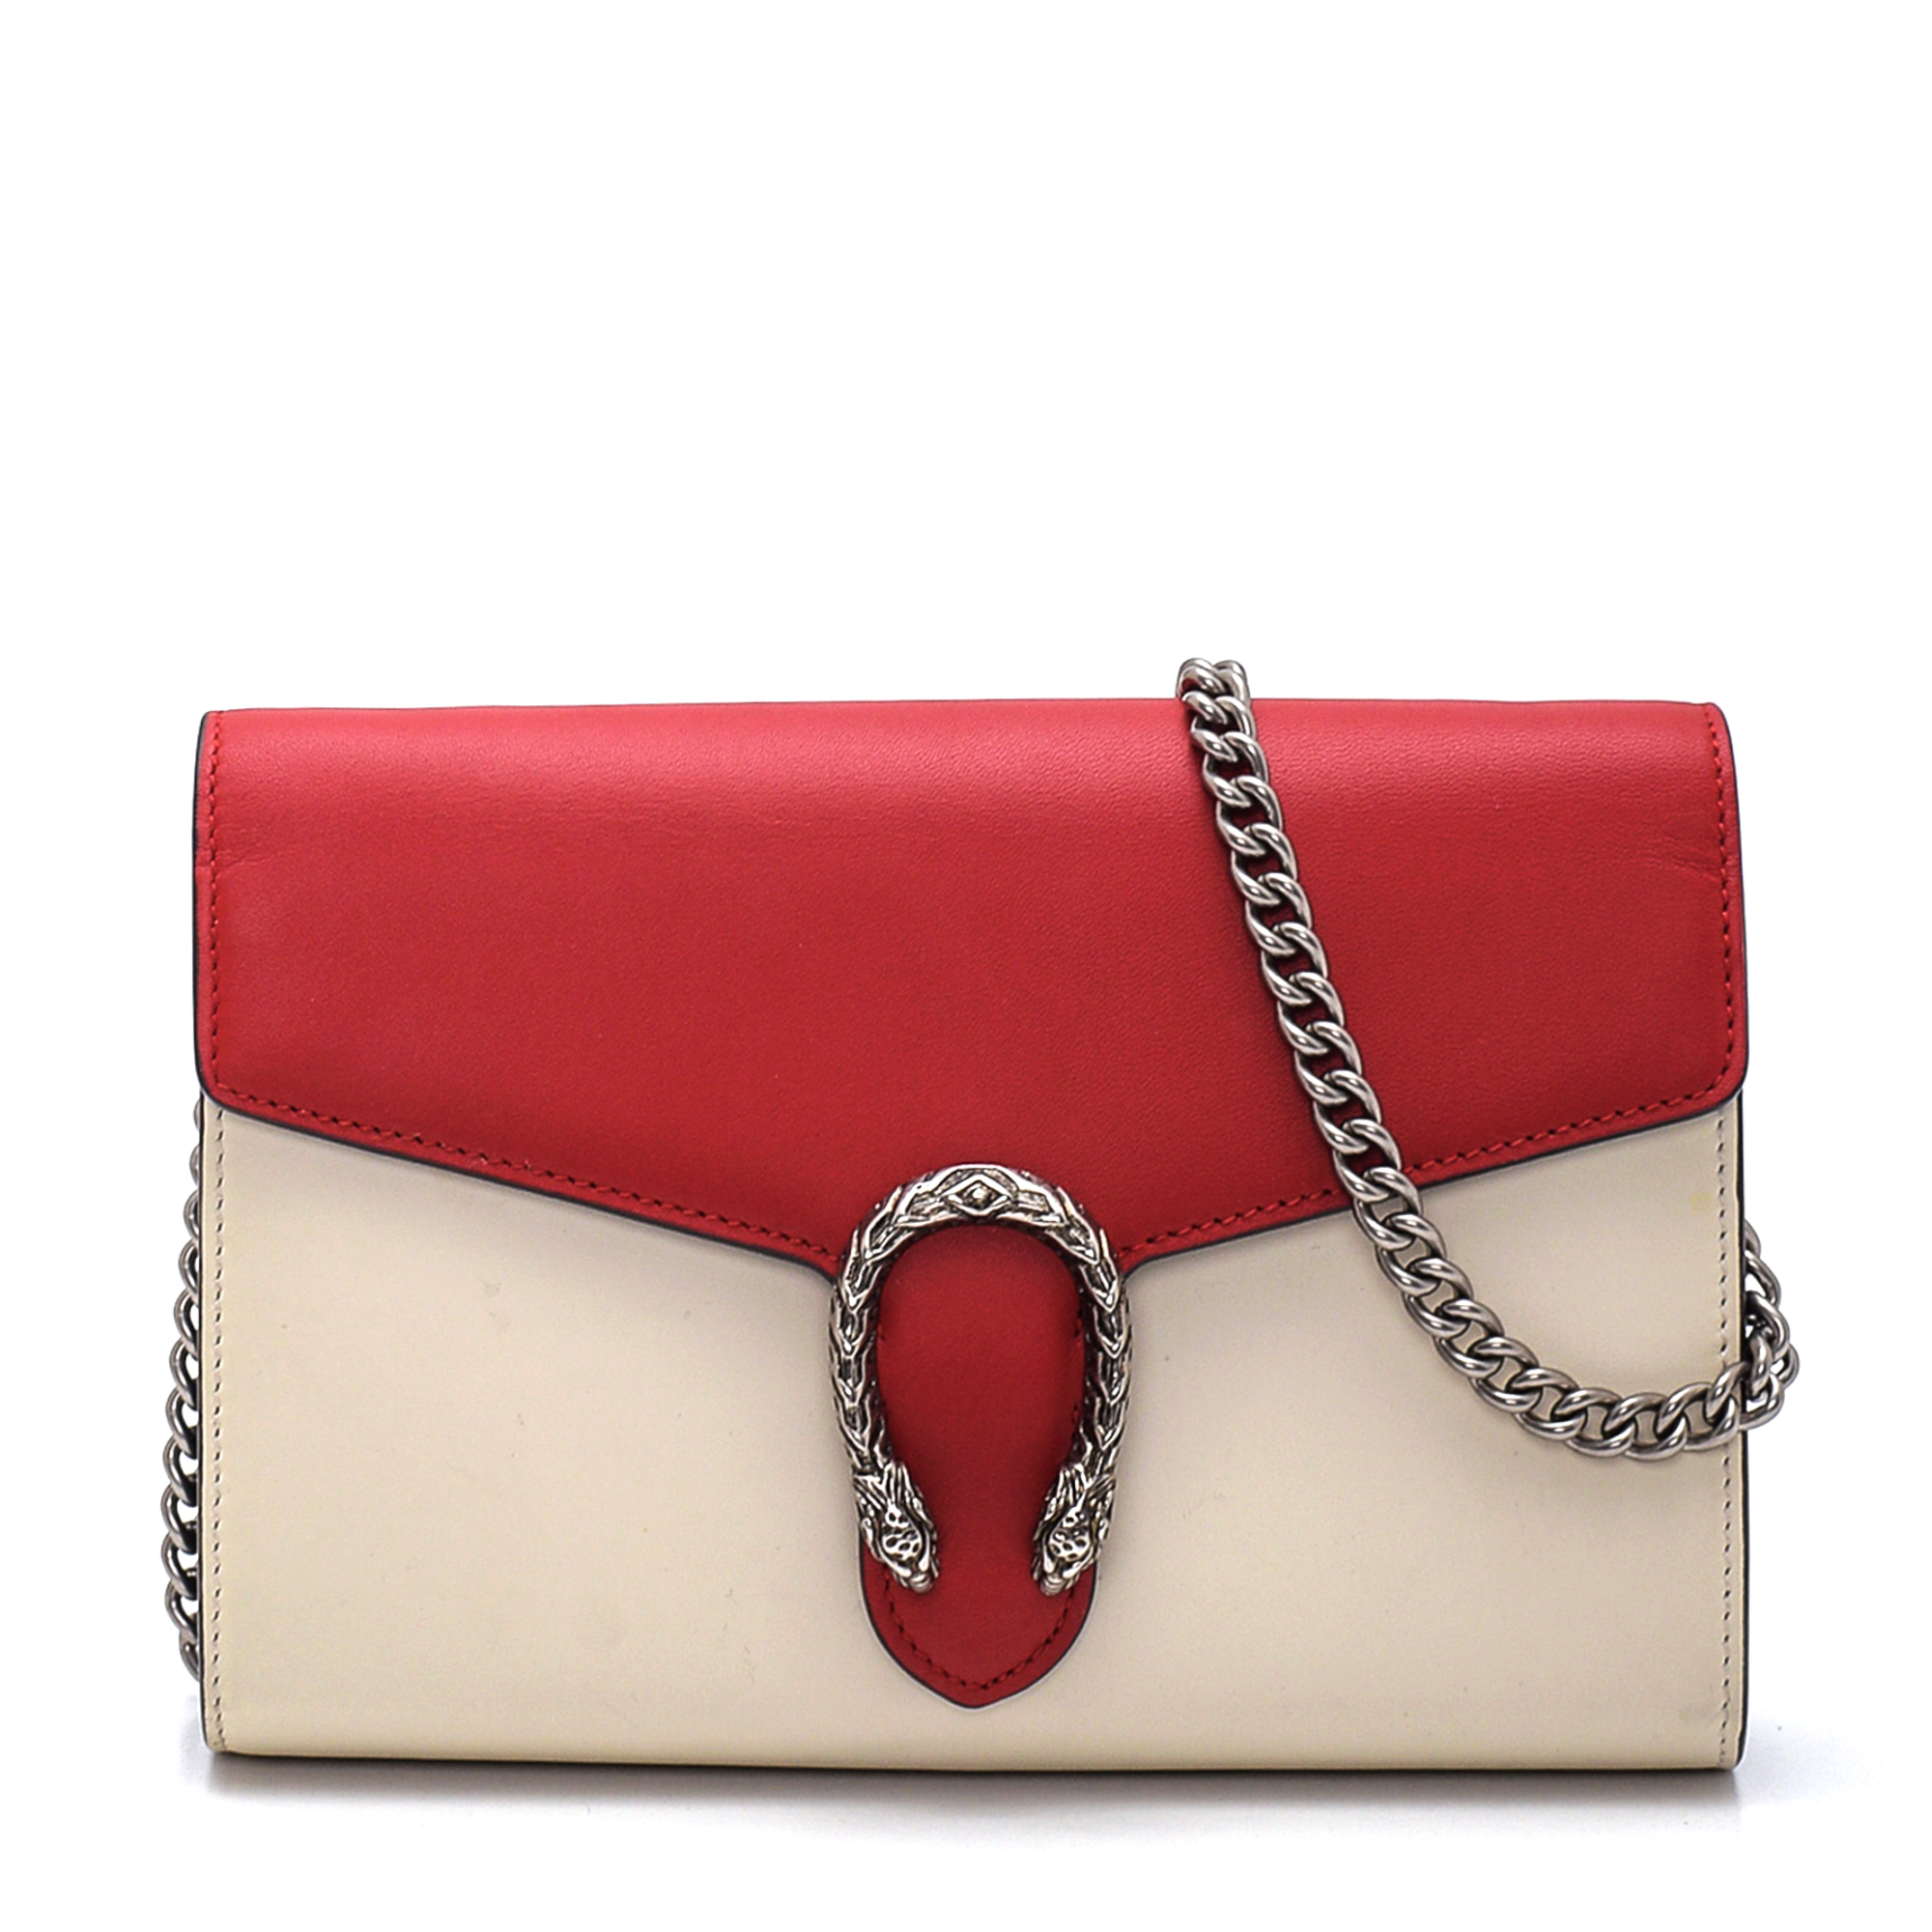 Gucci - Tricolor Leather Small Dionysus Bag